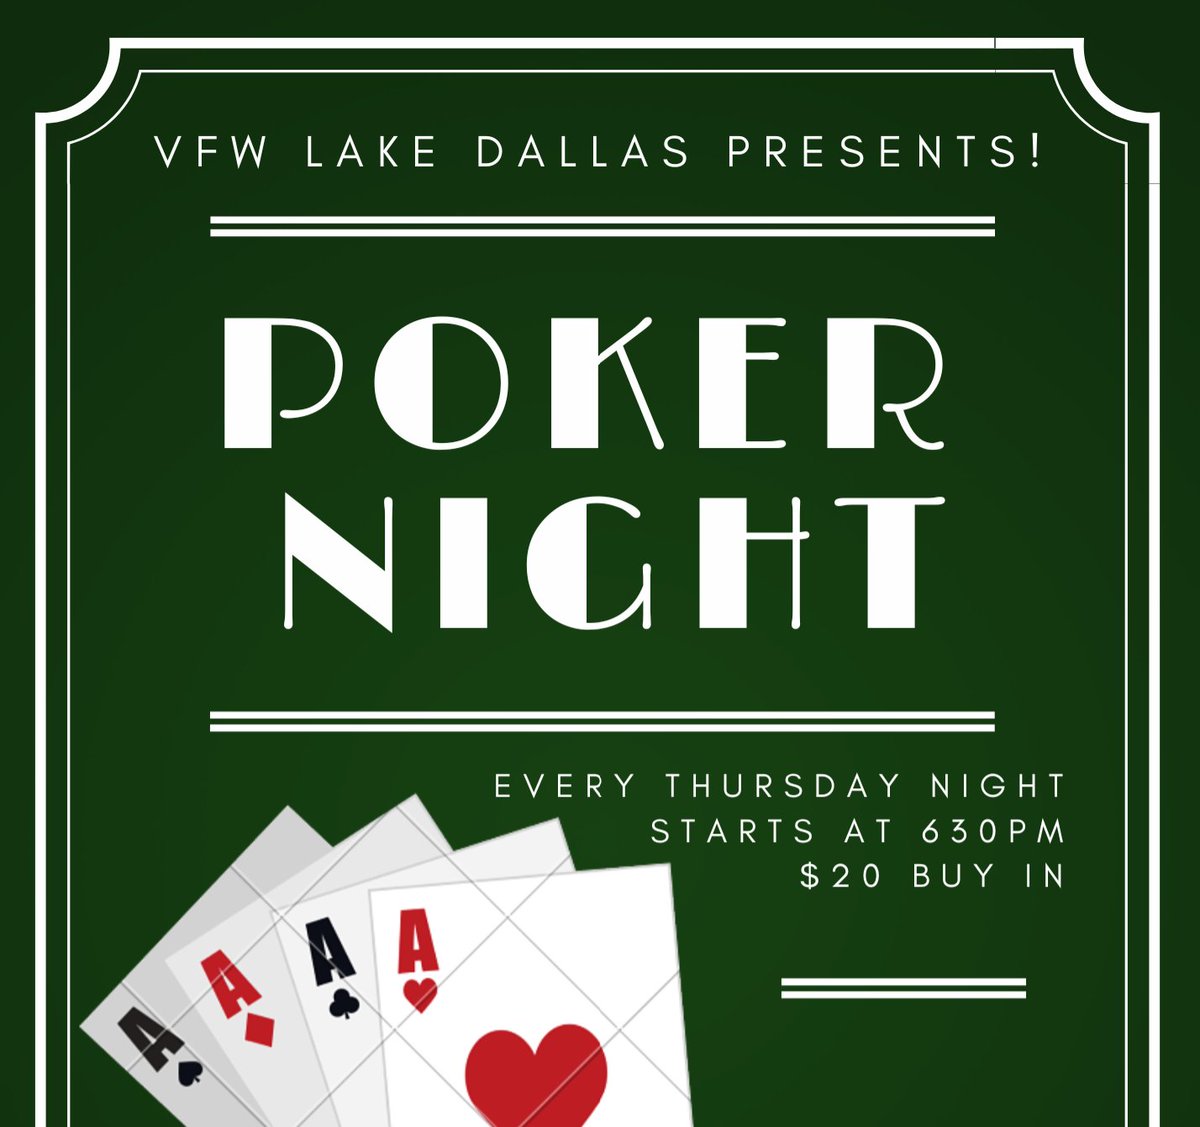 #pokernight Is Every Thursday Night at The VFW in Lake Dallas!! Starts at 630PM!! EVERYONE'S Welcome $5 buy in #pokernight #vfwlakedallas #VFWPOST10460 #lakedallas #lakecities #everyoneswelcome #thirstythursdays